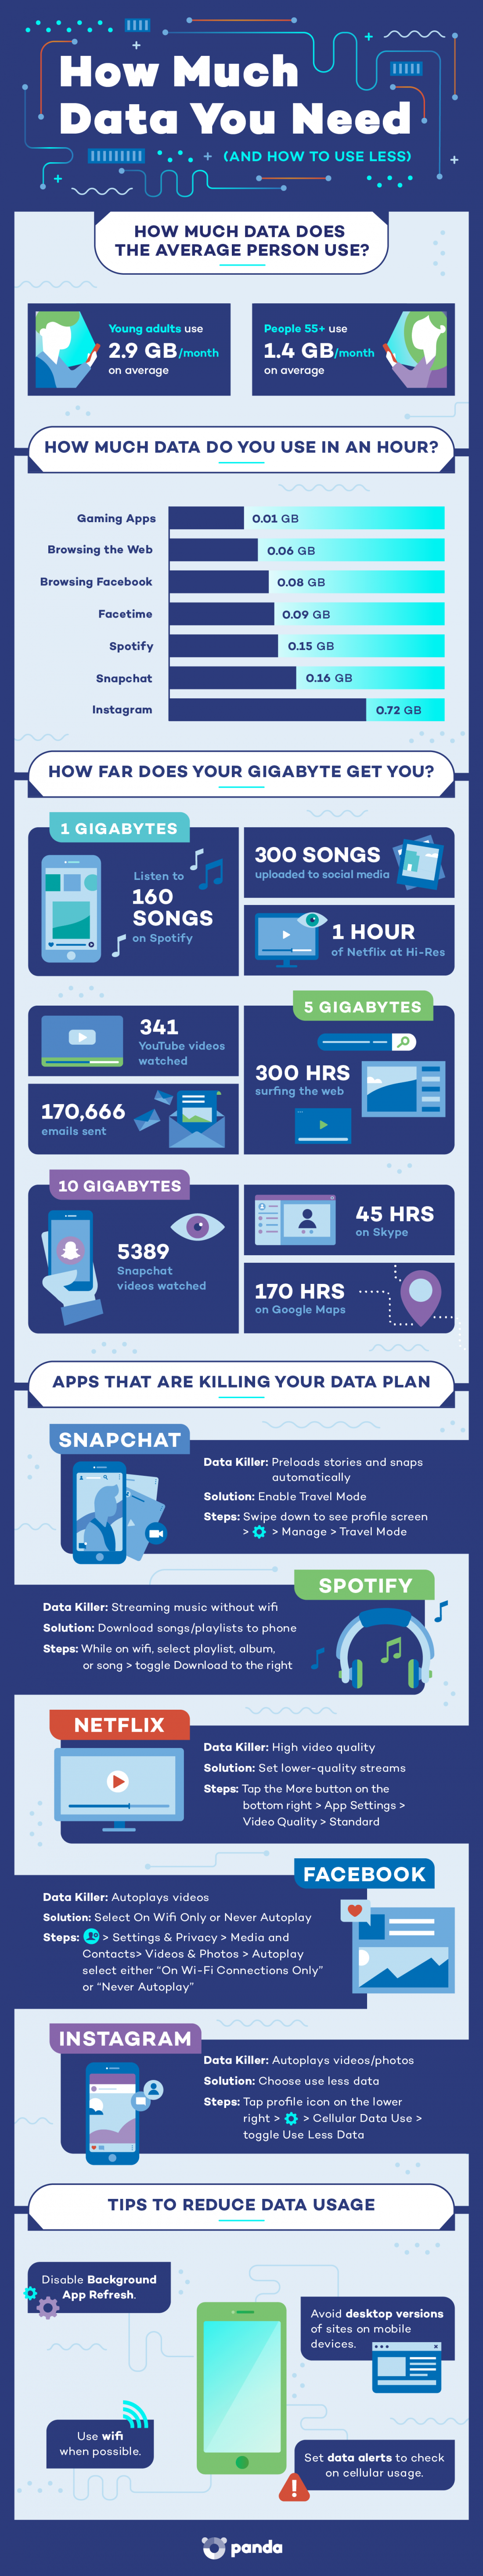 How Much Data You Need and How to Use Less